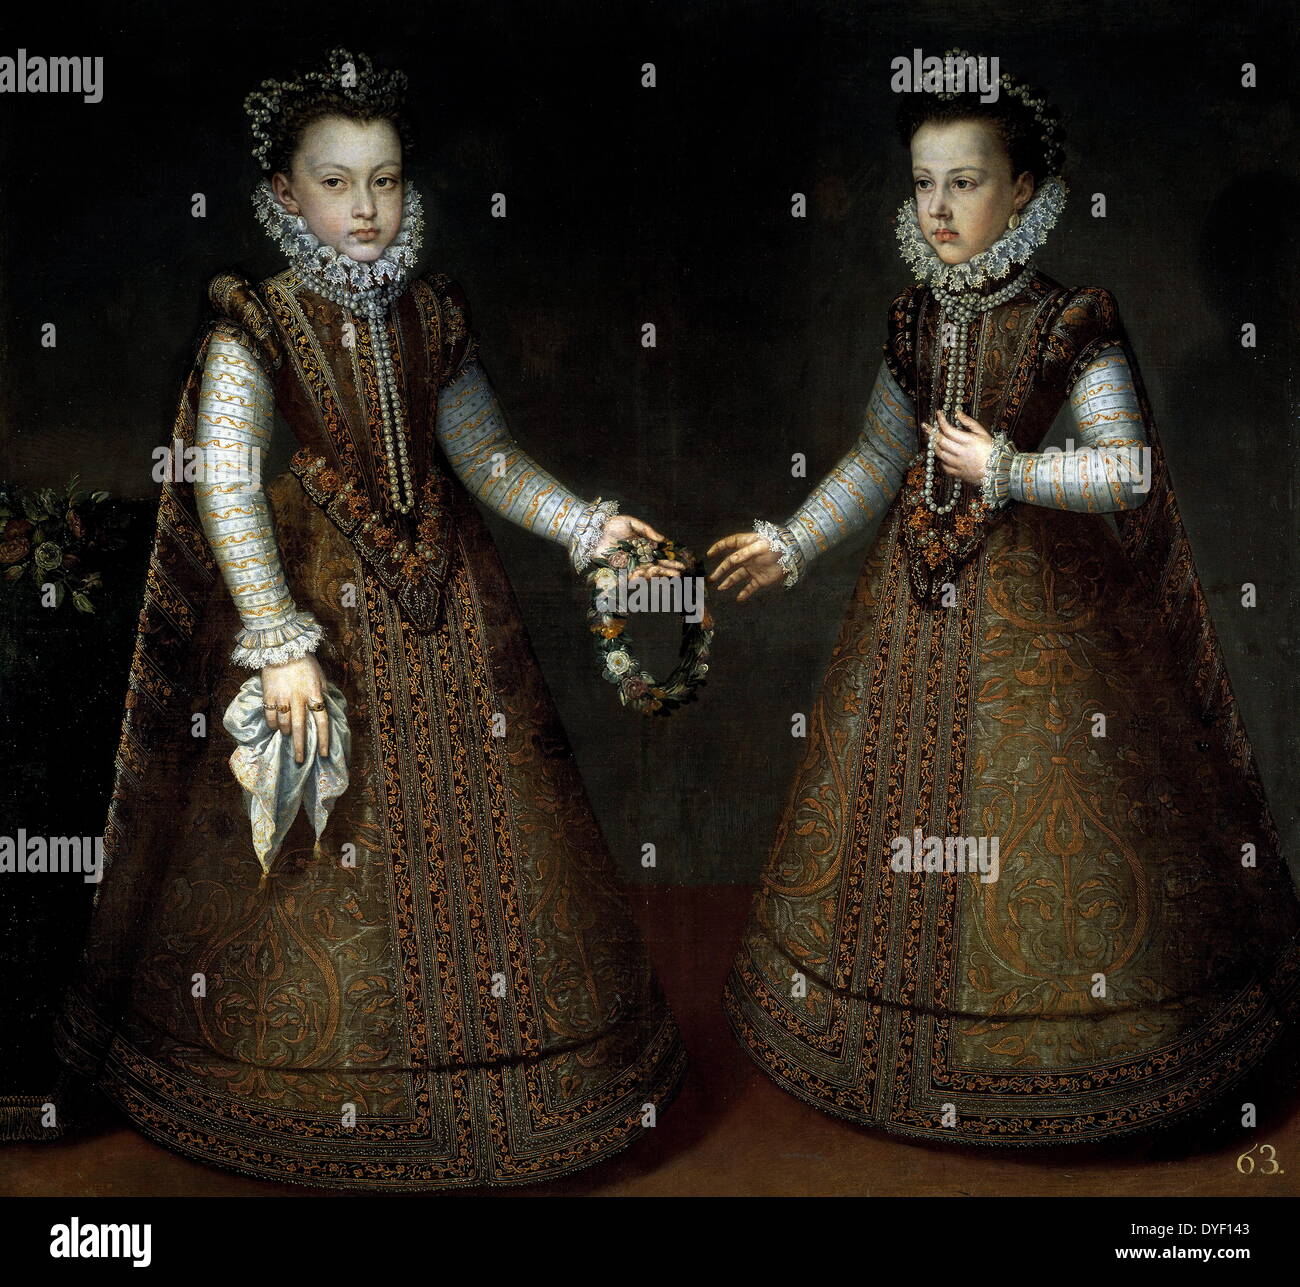 Painting by Alonso Sánchez Coello of the infants Isabella Clara Eugenia of Austria and Catherine Michelle of Spain. Both were the daughters of Philip II of Spain and Elisabeth of Valois, and were born in 1566, and 1567 respectively. Catherine, (known in Spanish as: Catalina Micaela de Austria) was the youngest surviving daughter of that royal coupling. Oil on Canvas. Stock Photo